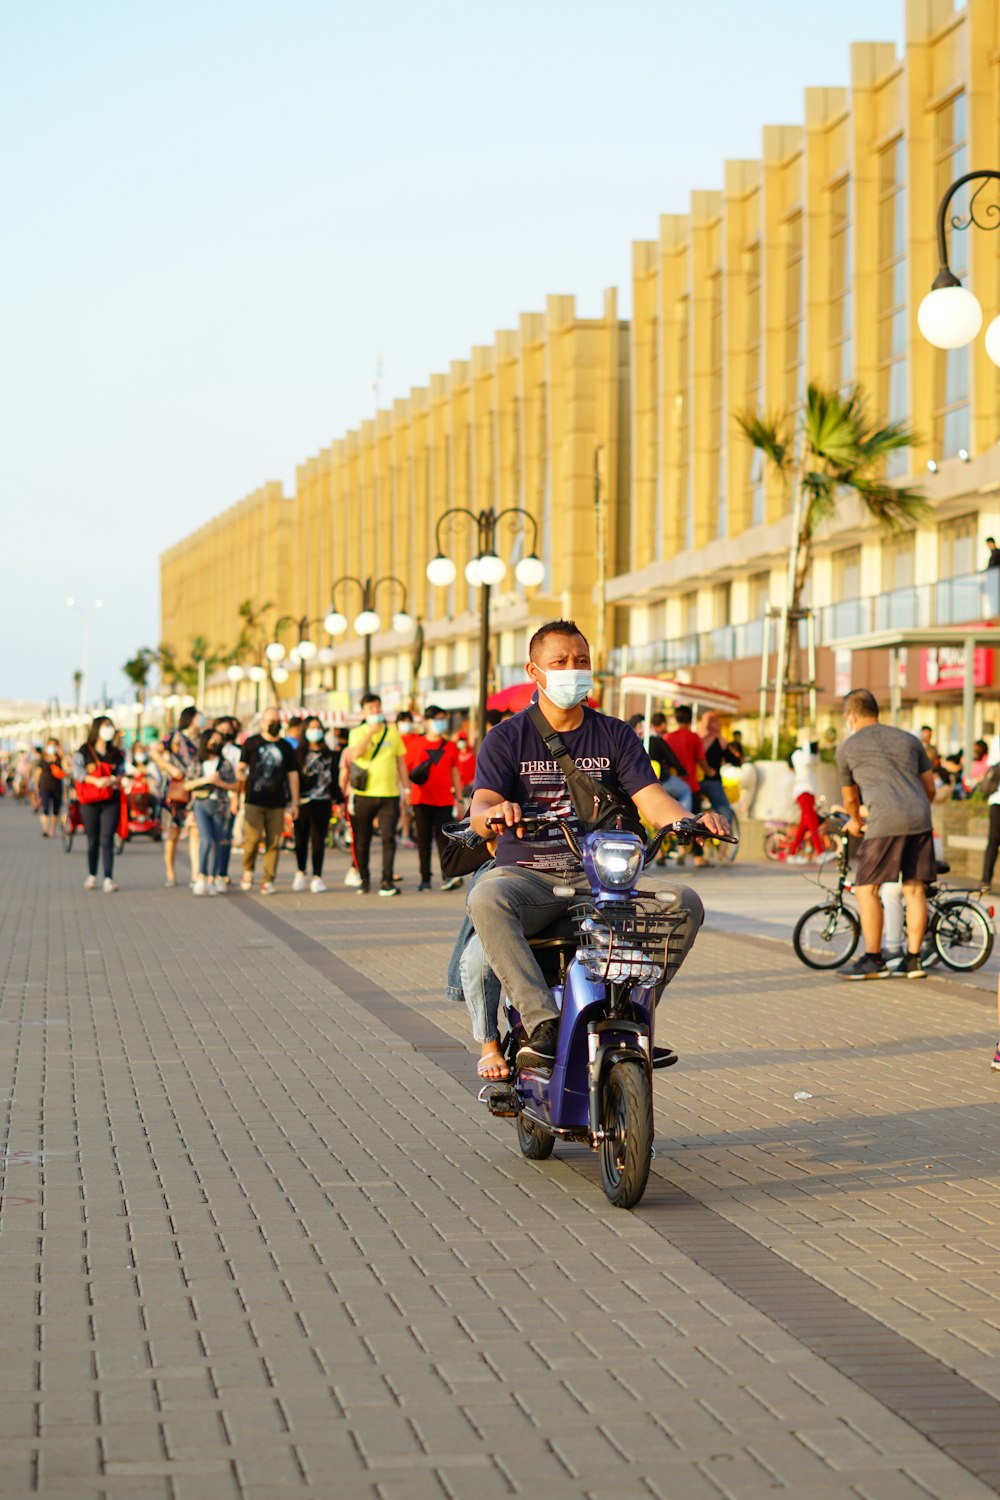 man in white and red striped shirt riding motorcycle during daytime